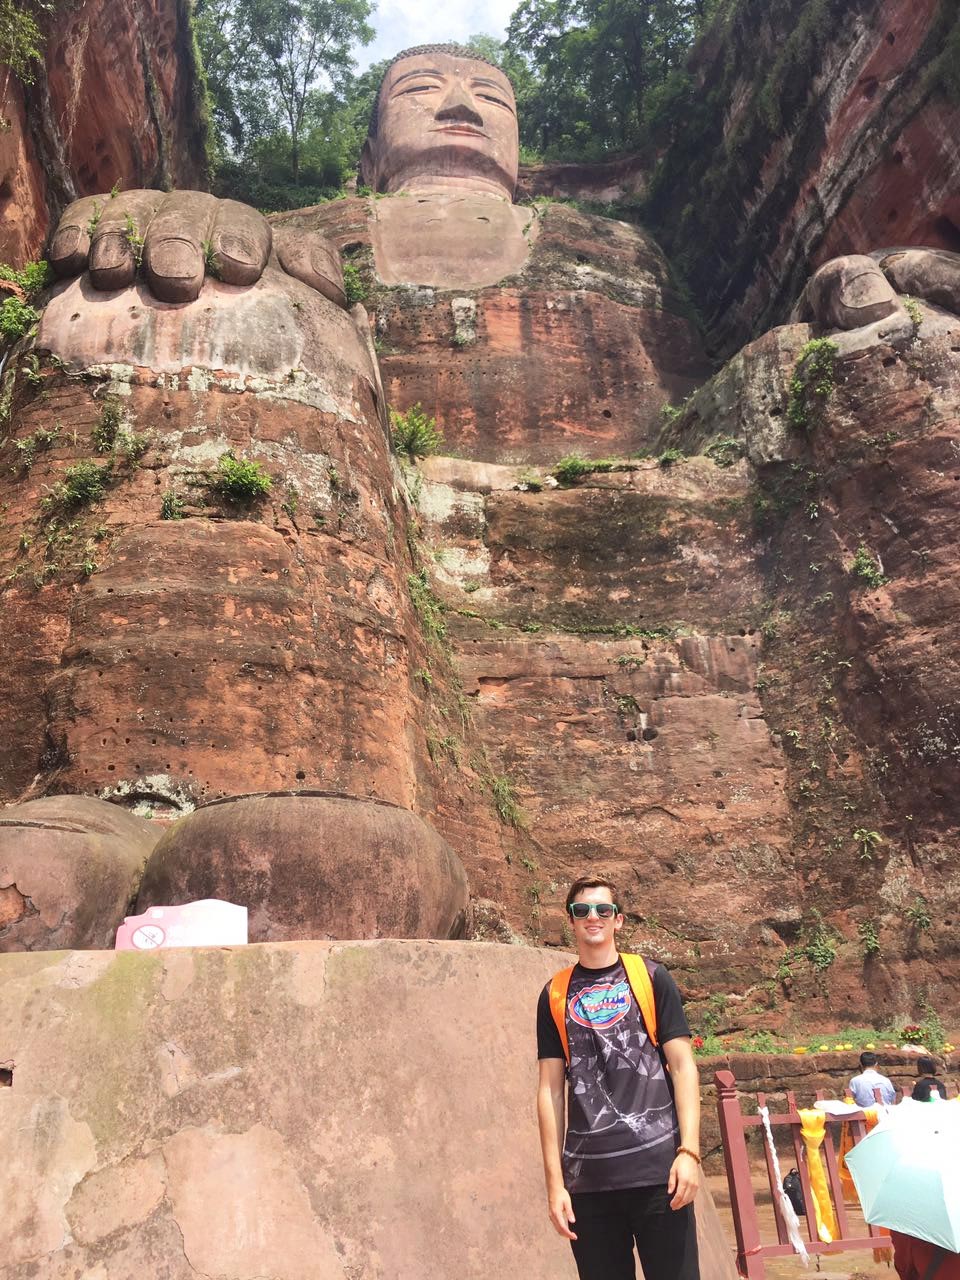 Student standing in front of the world's largest sitting Buddha in Leshan, China.